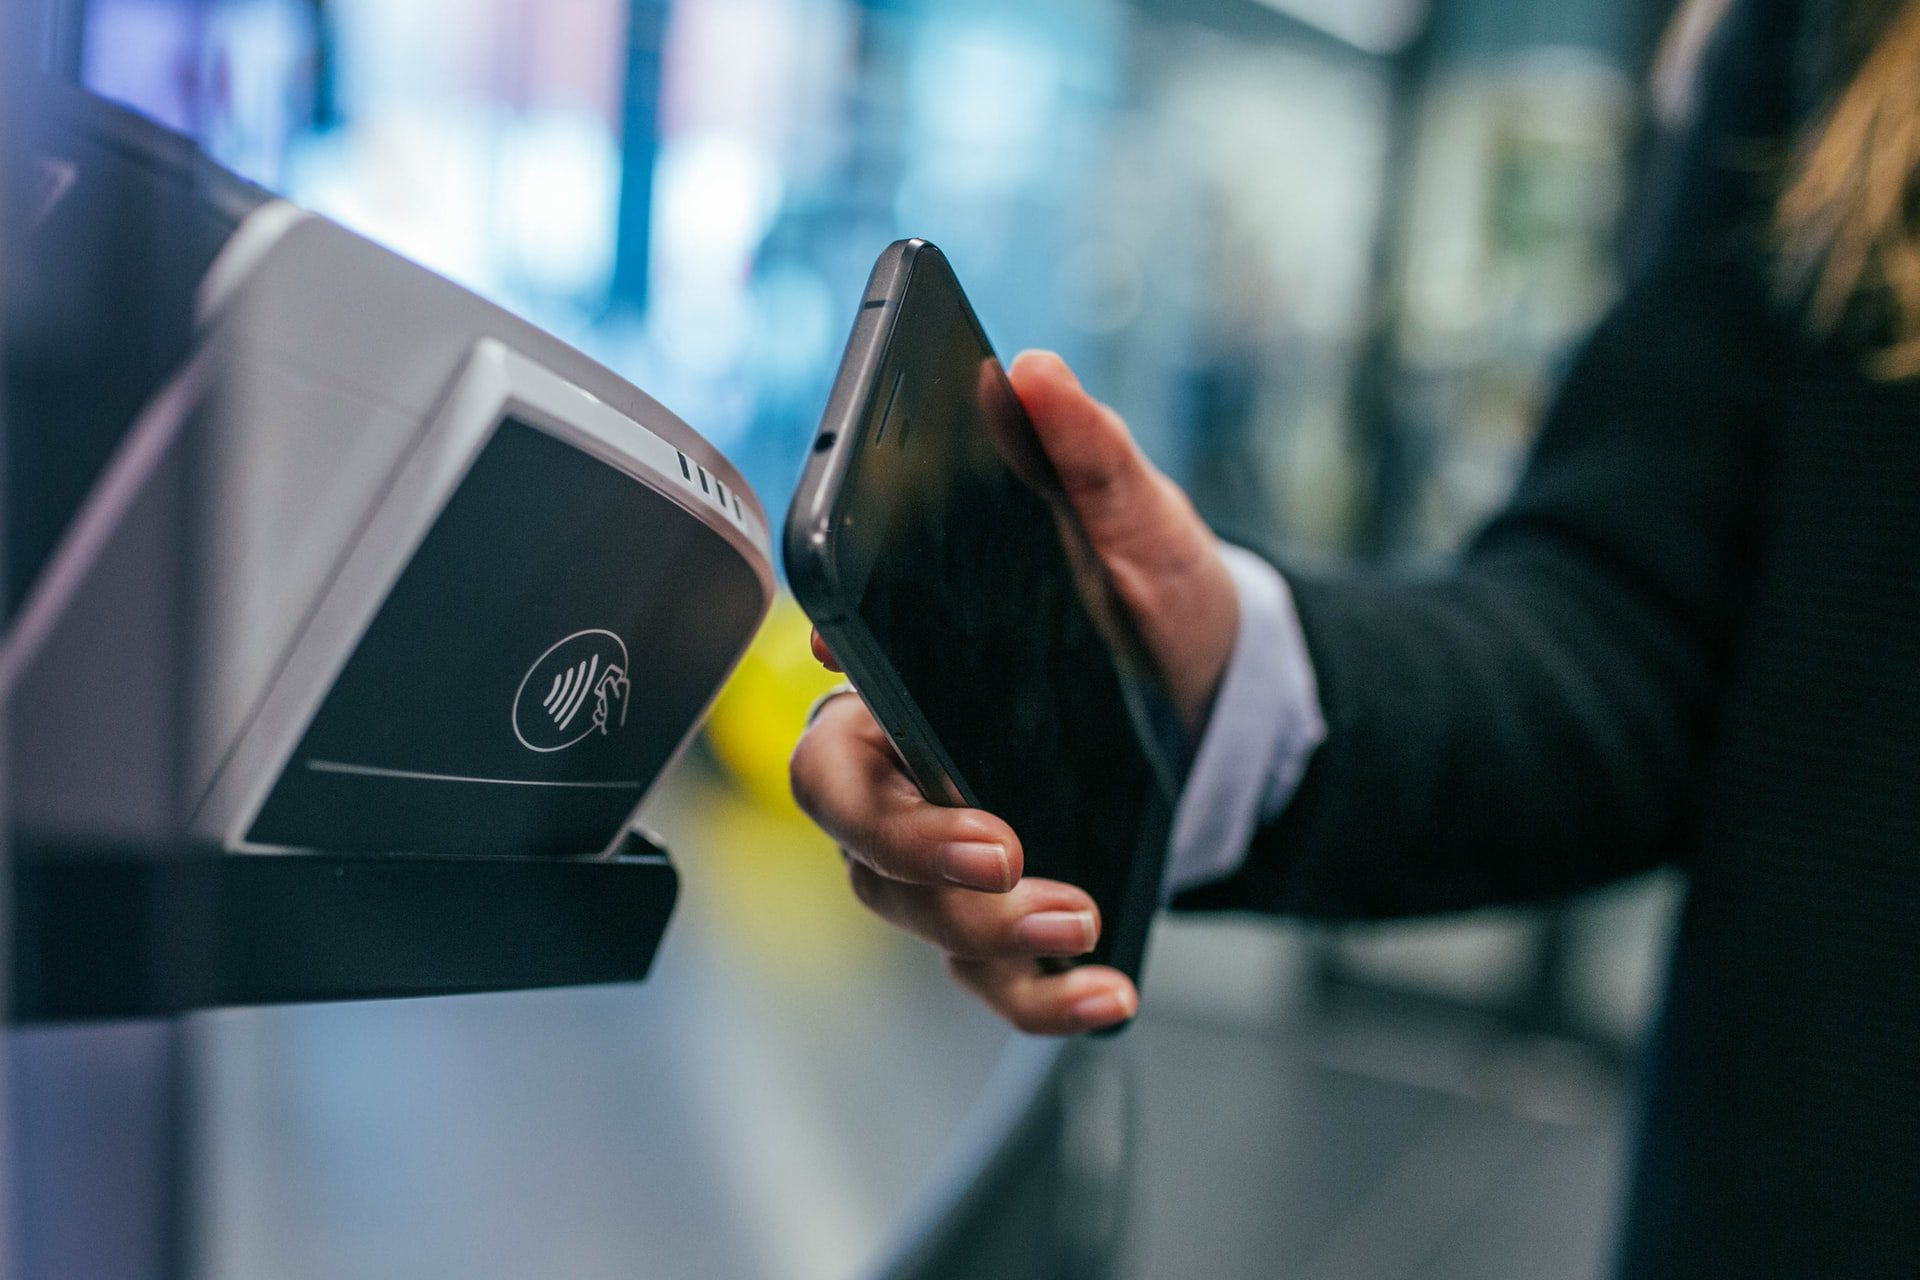 More companies are embracing digital payments.